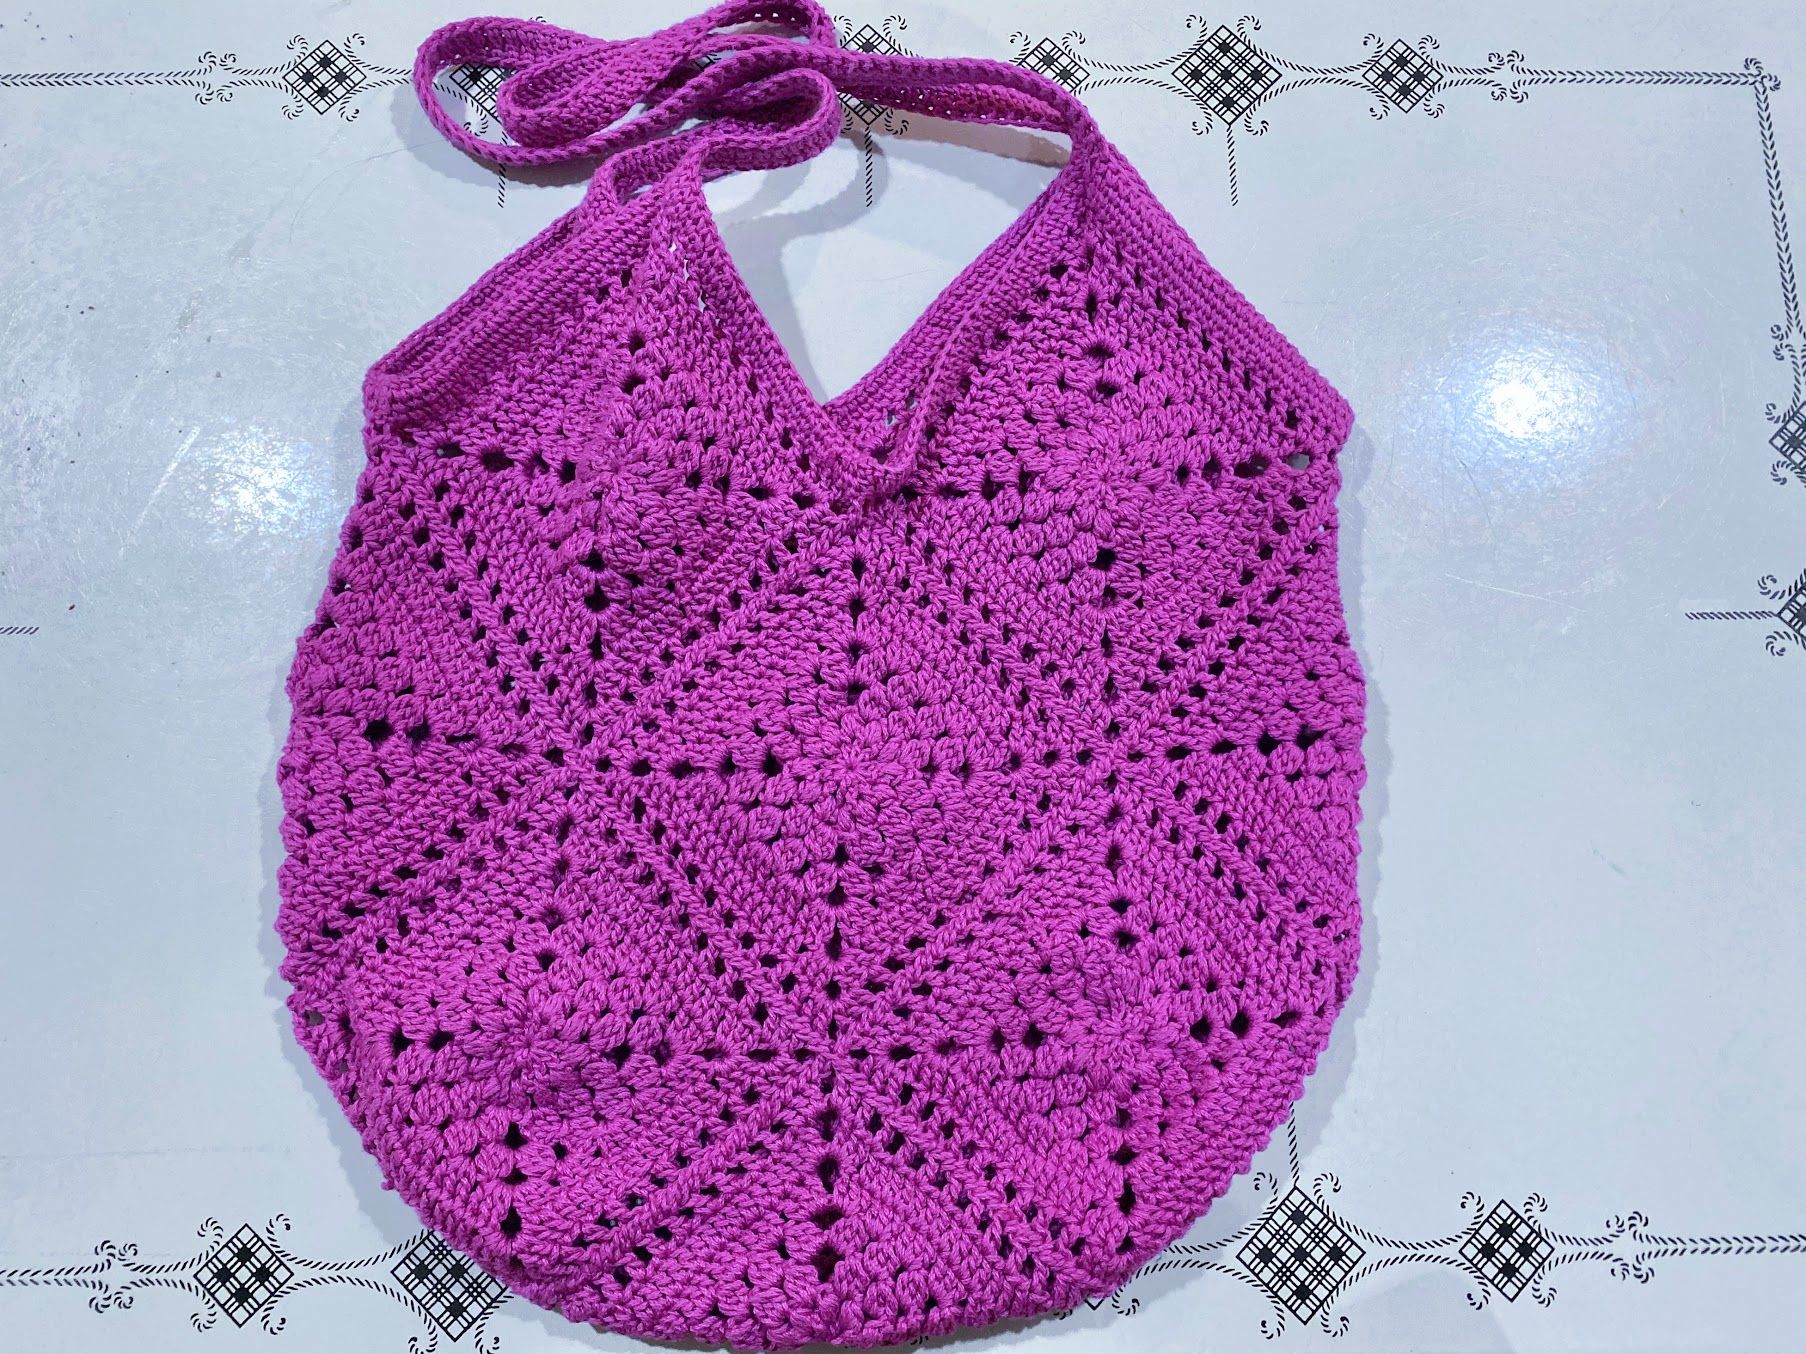 Pattern: Wildrose Market Bag - All About Ami